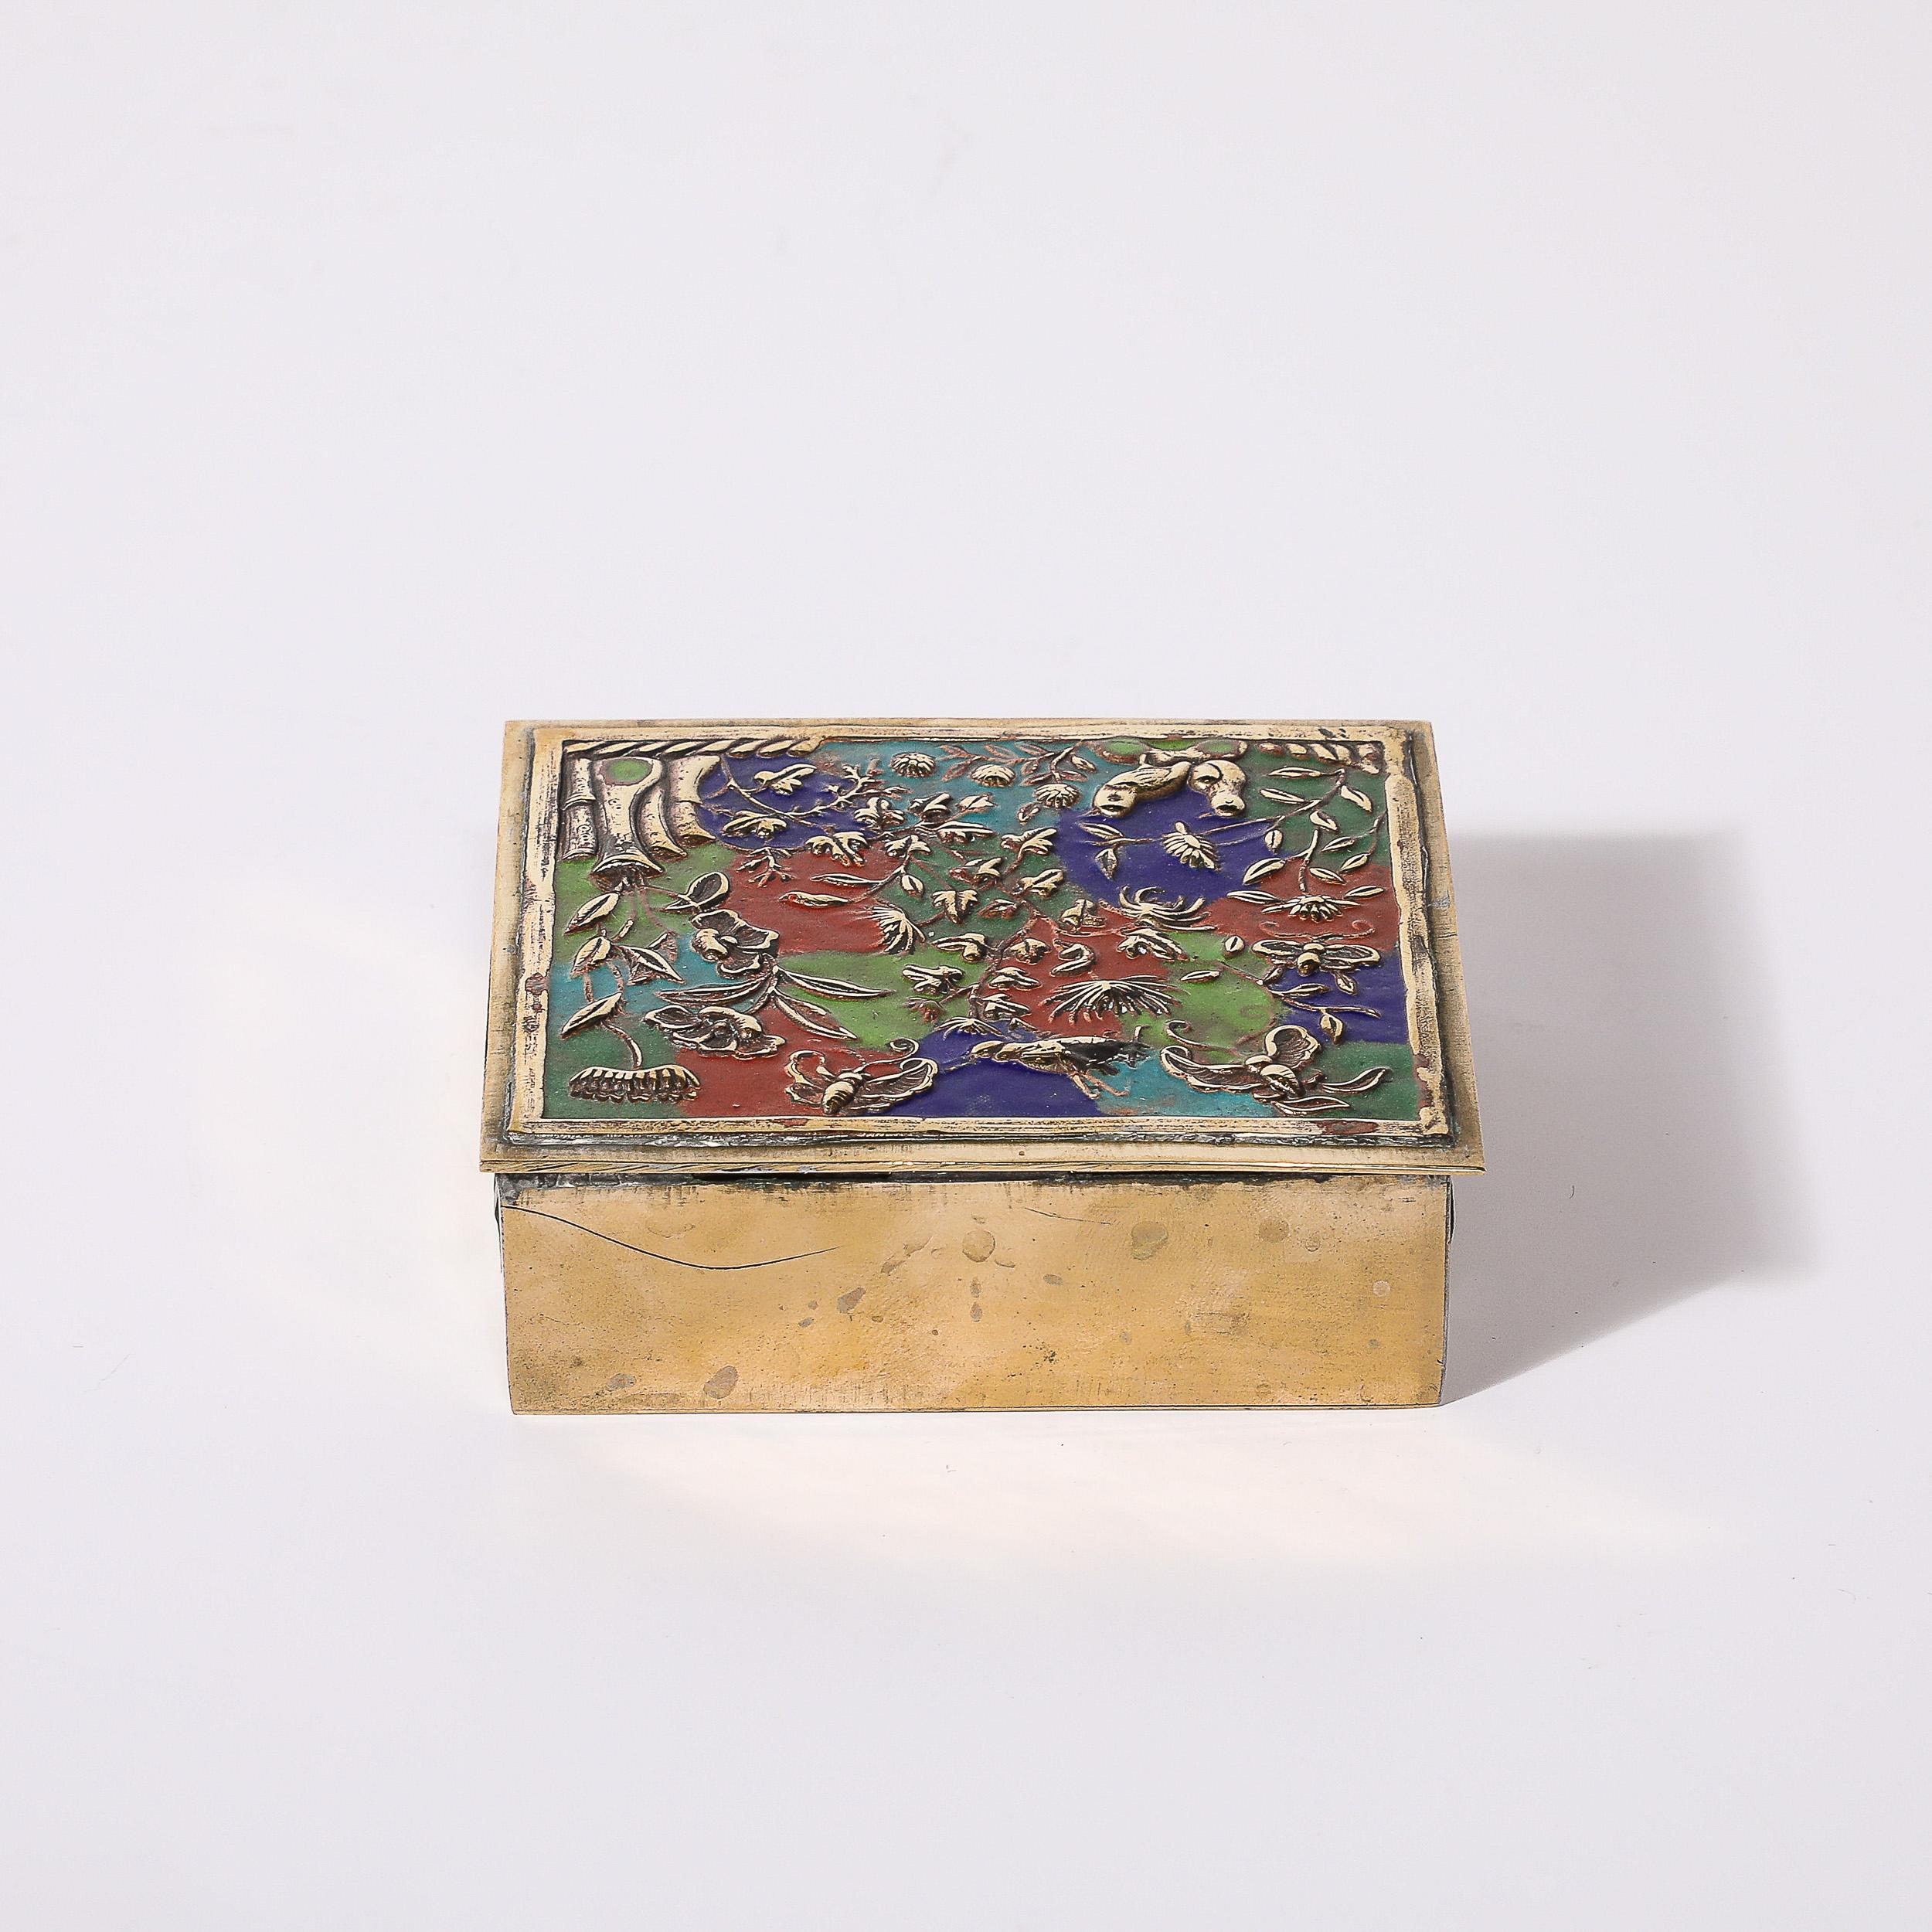 Art Deco Brass and Enamel Box W/ Naturalist Imagery in Relief Cloisonne For Sale 2